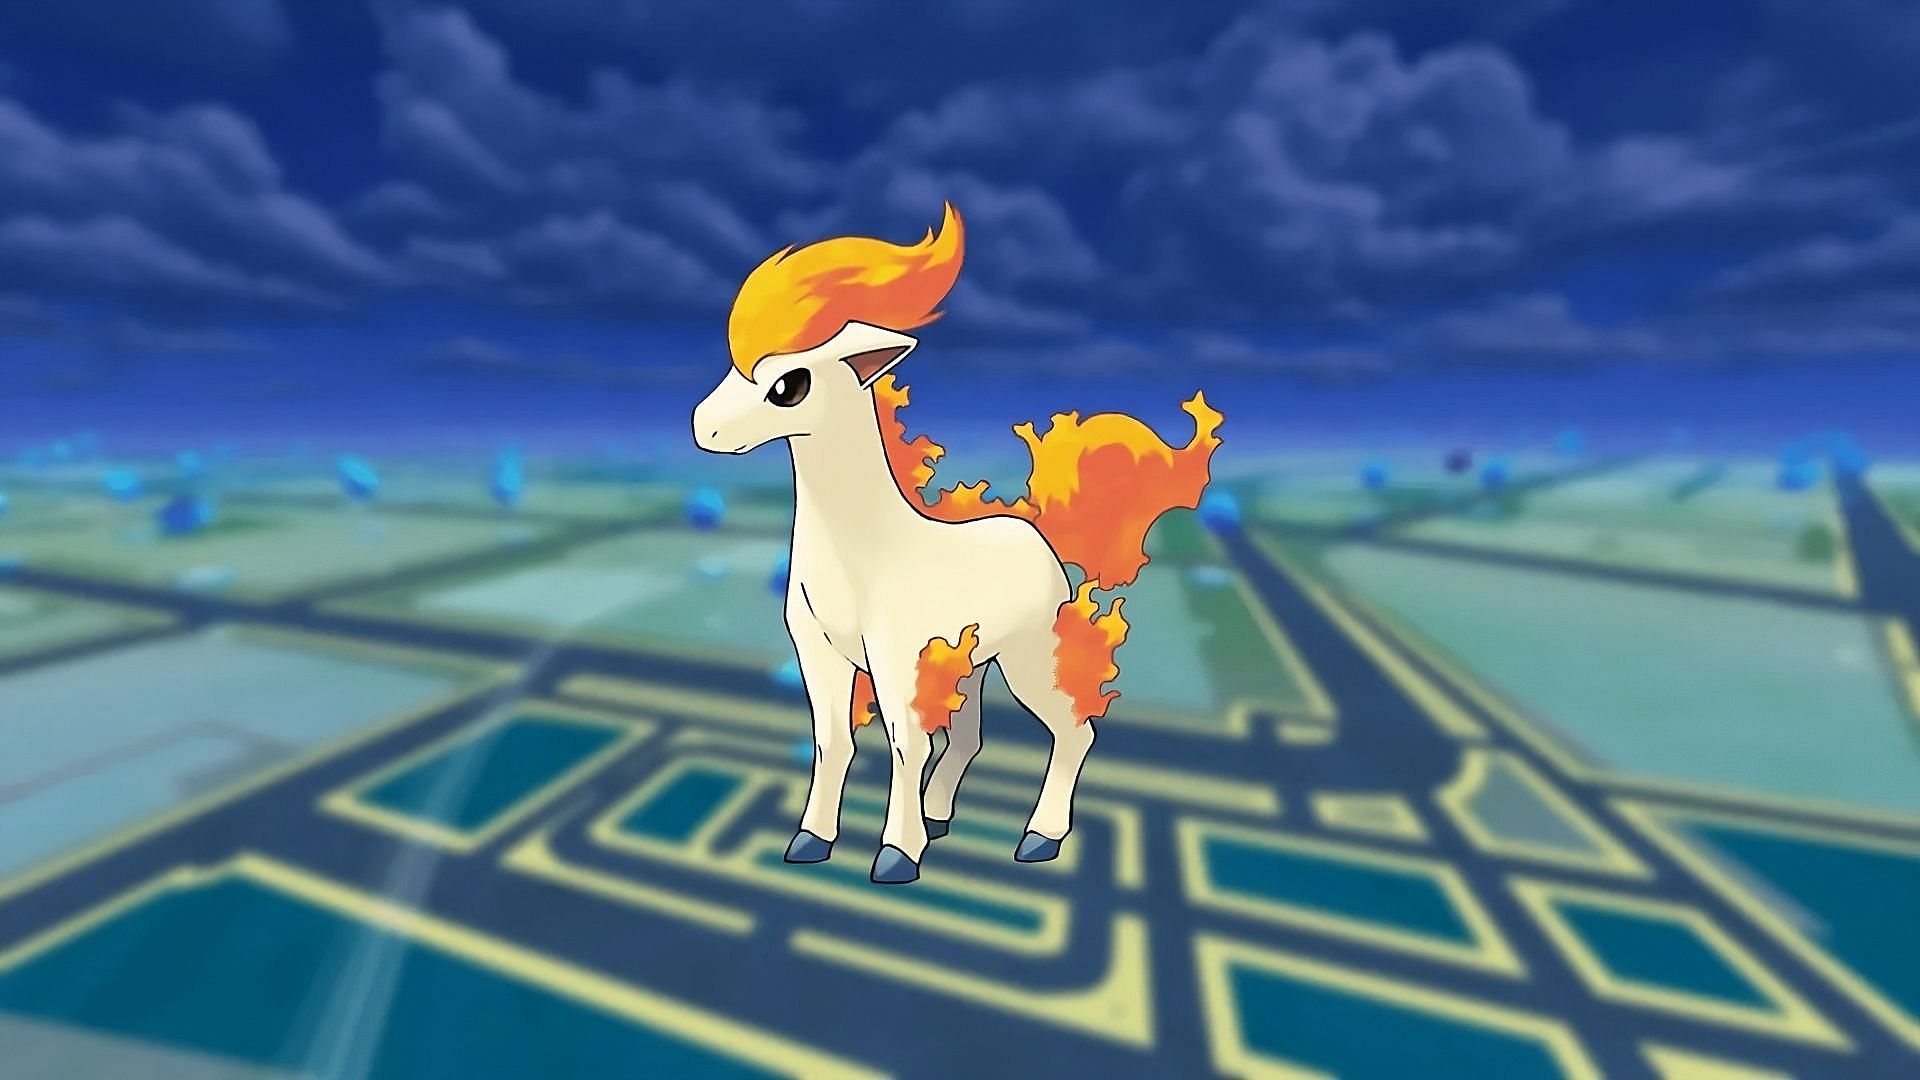 Ponyta is a Fire-type species from the first generation of Pokemon games.